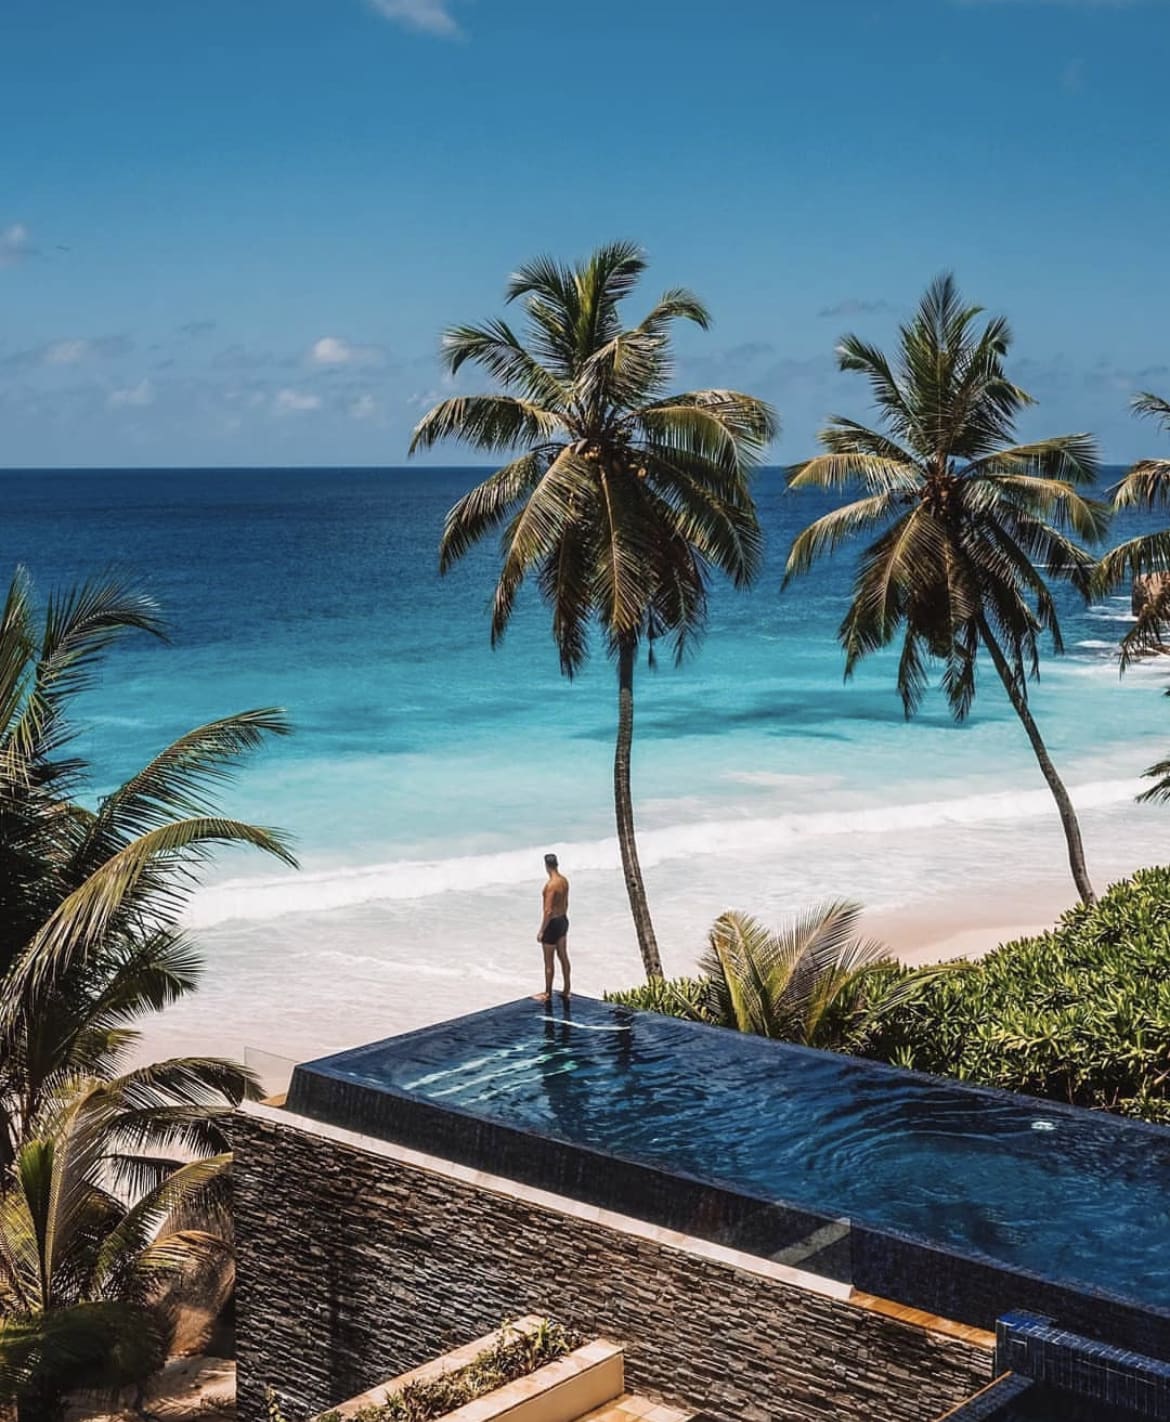 A young man stands at the edge of an infinity pool at a resort in the Seychelles